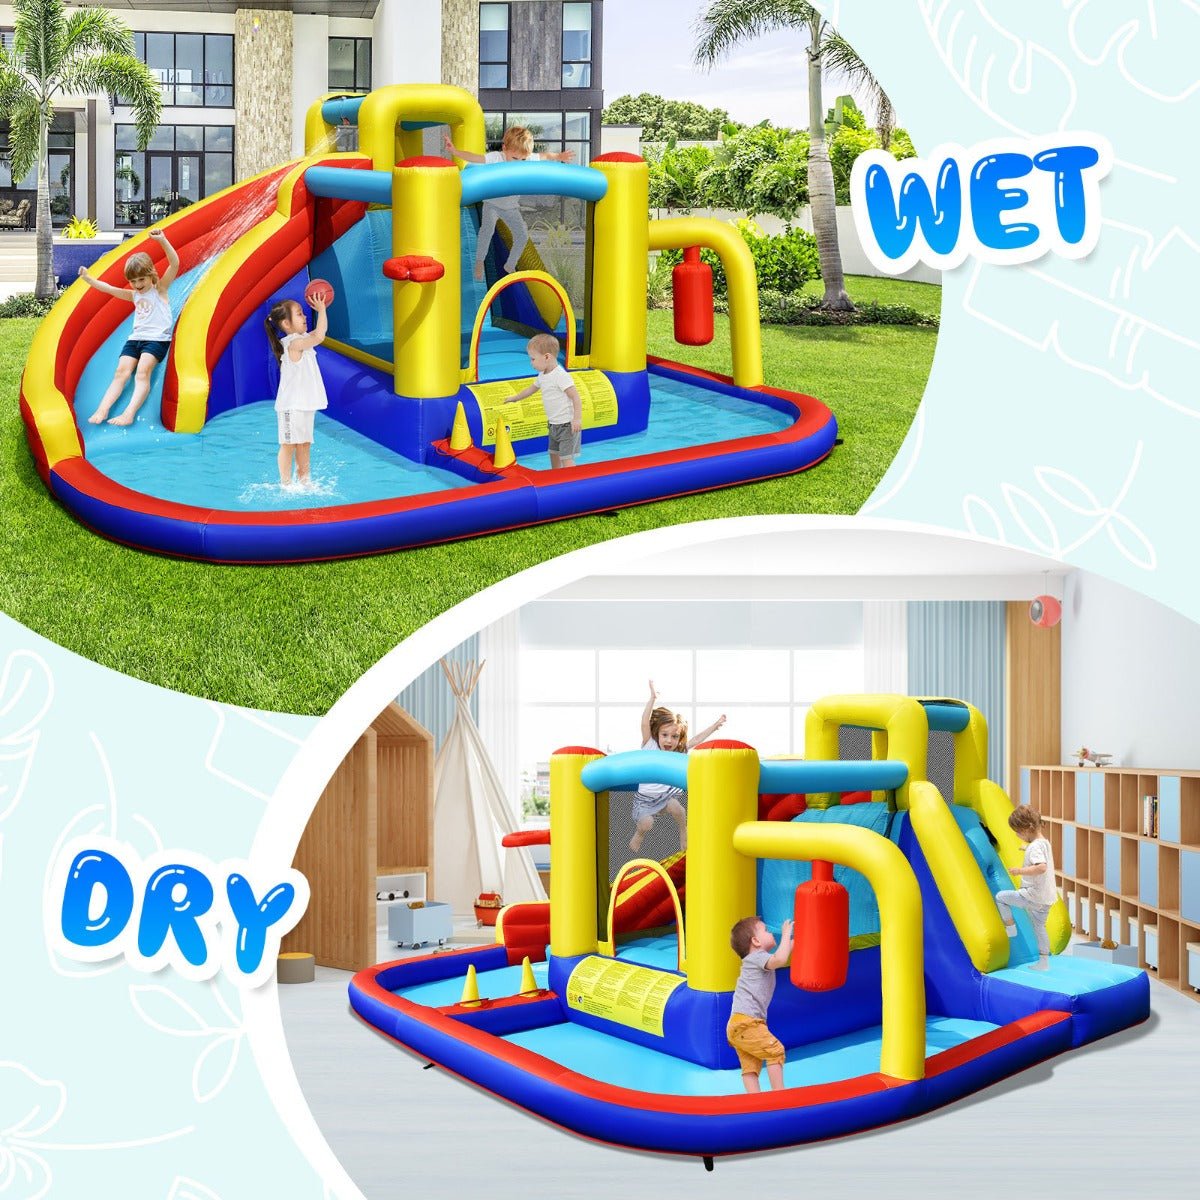 Kids' Adventure Paradise with Our Combo Set